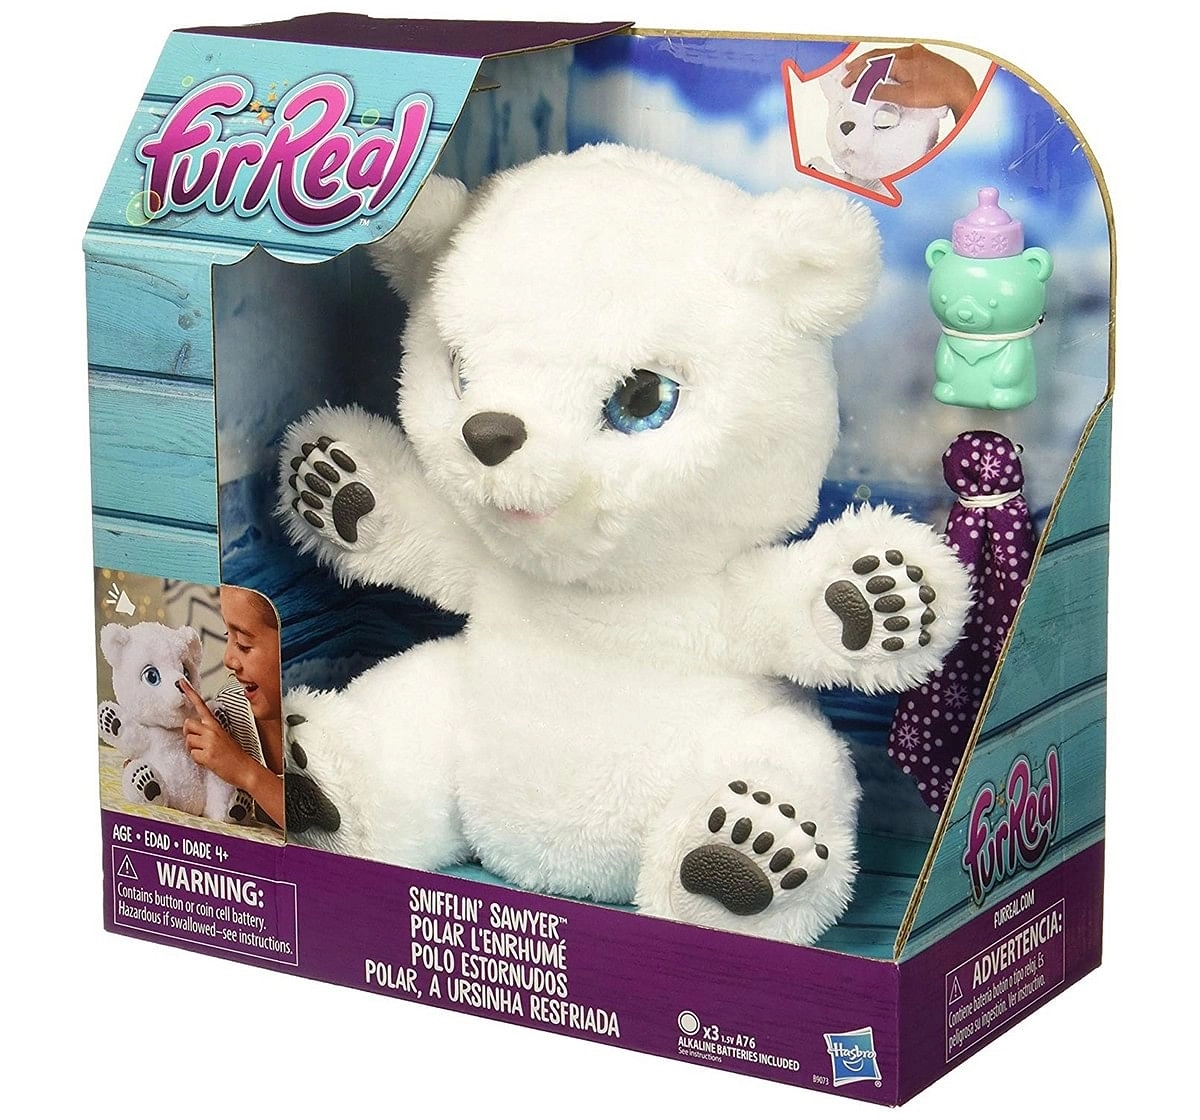 Furreal Friends Snifflin’ Sawyer Interactive Soft Toys for Kids age 4Y+ - 27.9 Cm 